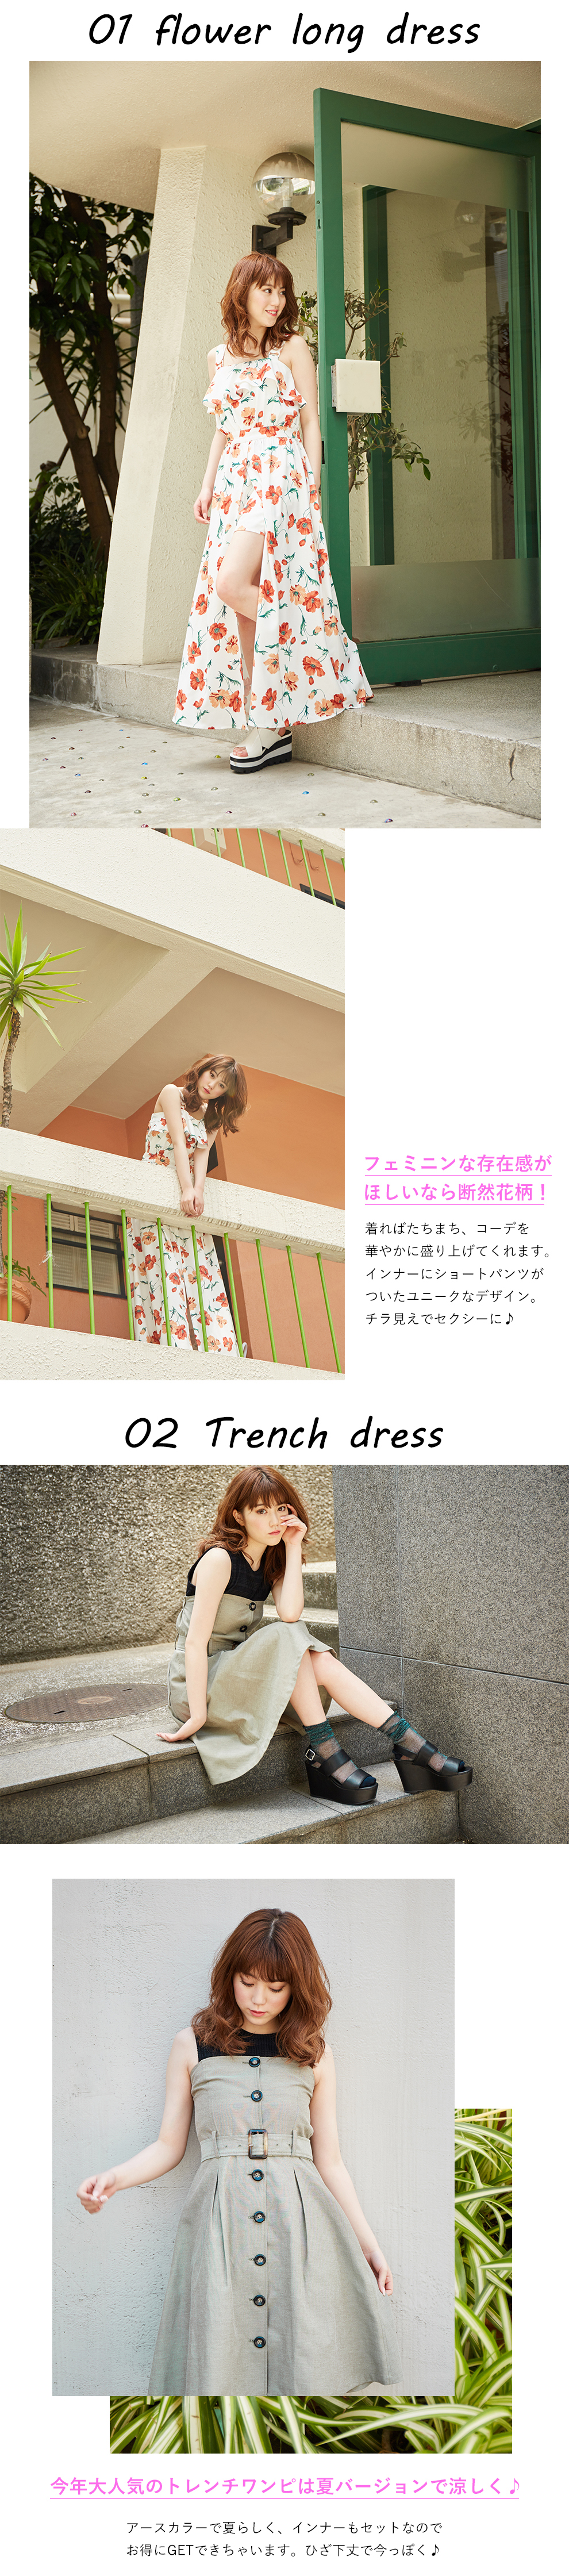 2018 summer collection Vol.2